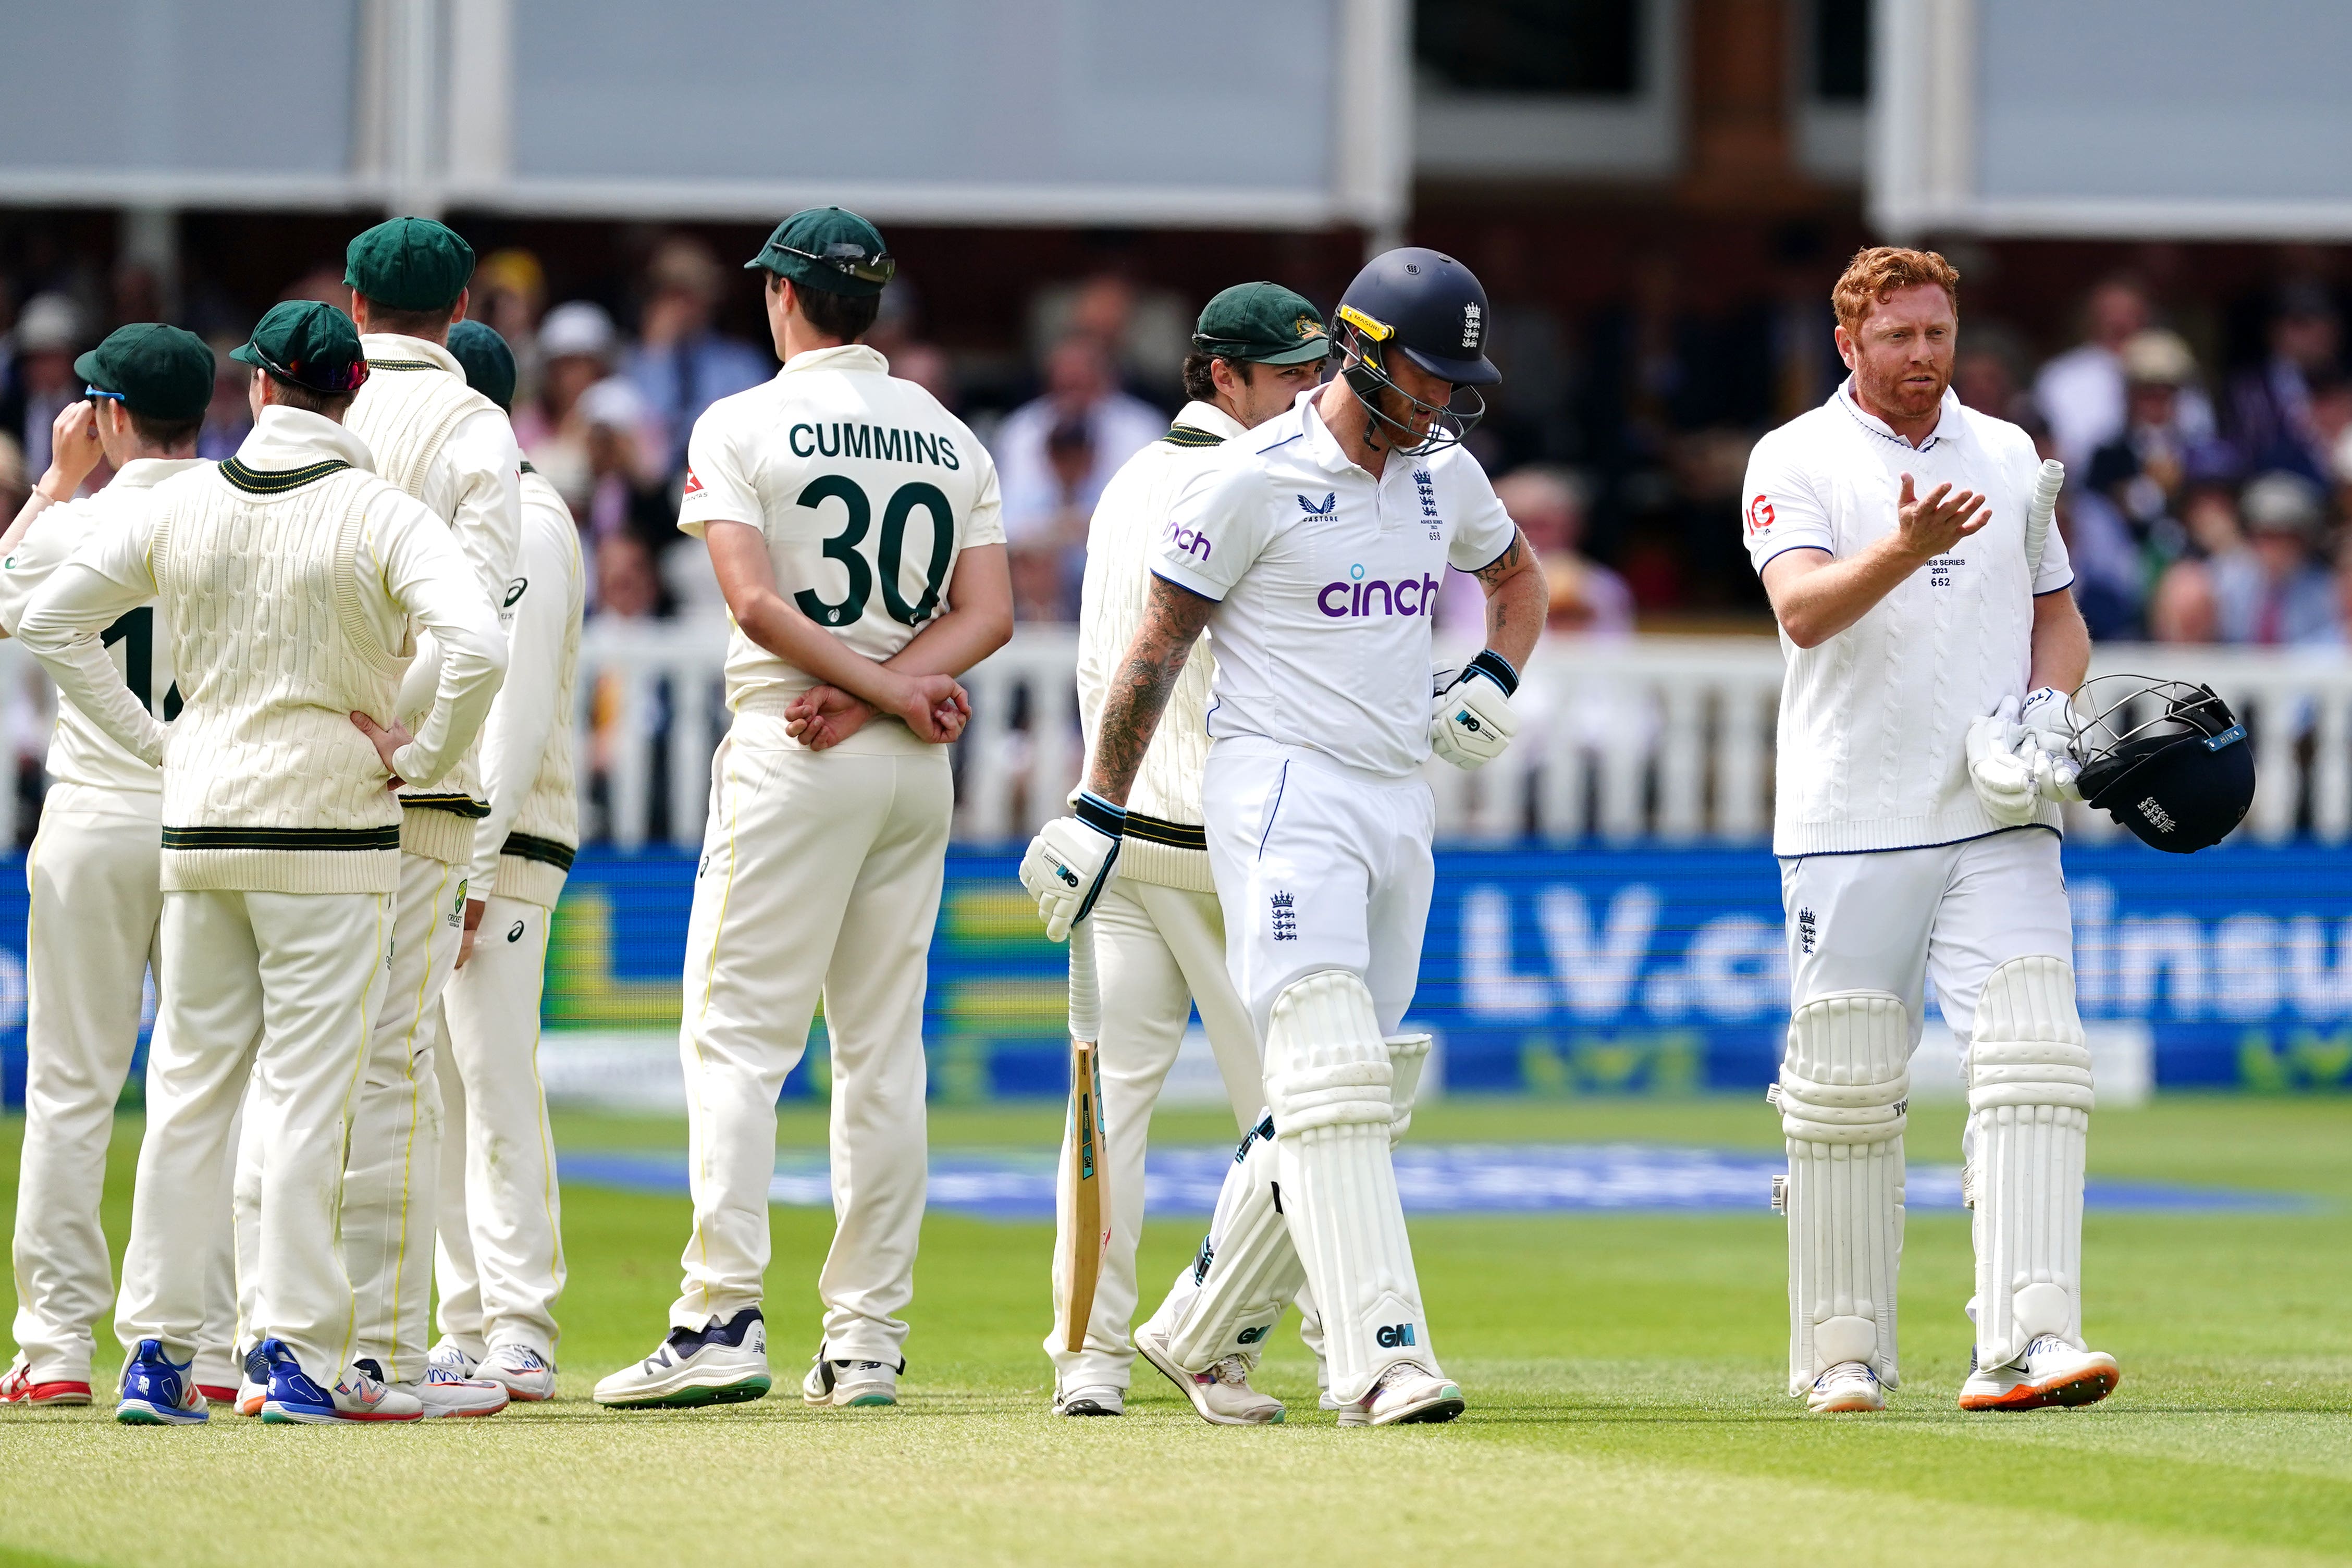 England’s Jonny Bairstow (right) reacts after being run out by Australia’s Alex Carey during day five of the second Ashes test match at Lord’s (Mike Egerton/PA)